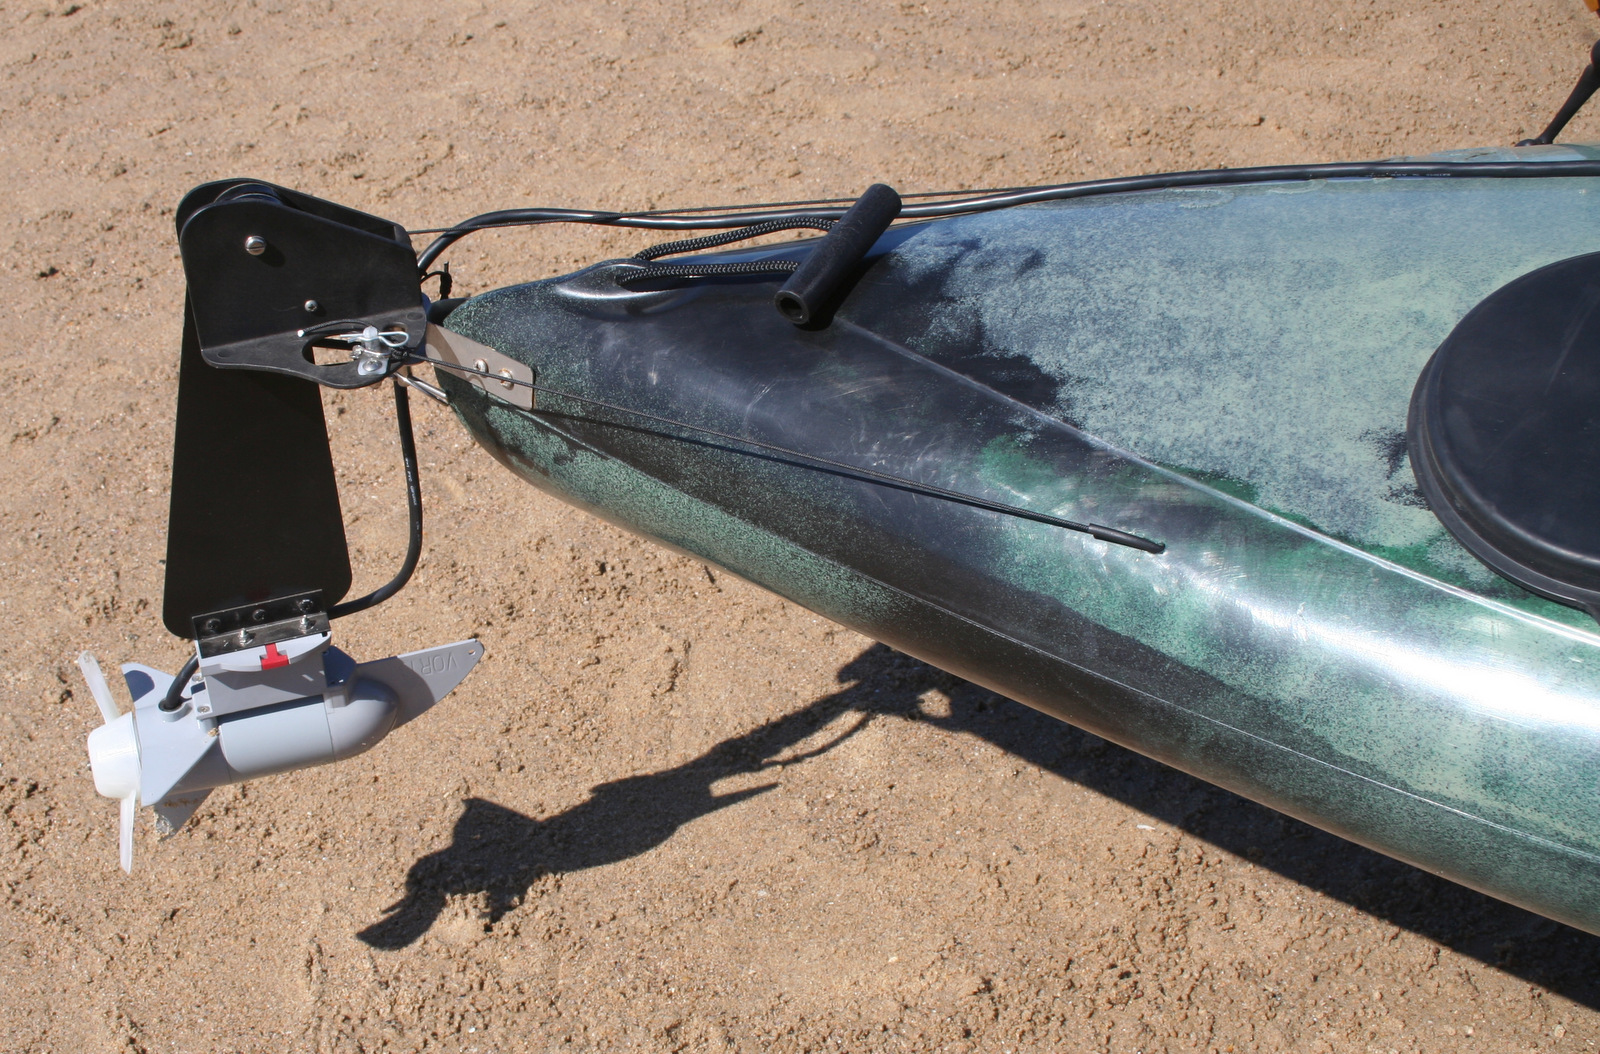 Bass Sit-in Kayak made in Australia by Australis Kayaks and Canoes